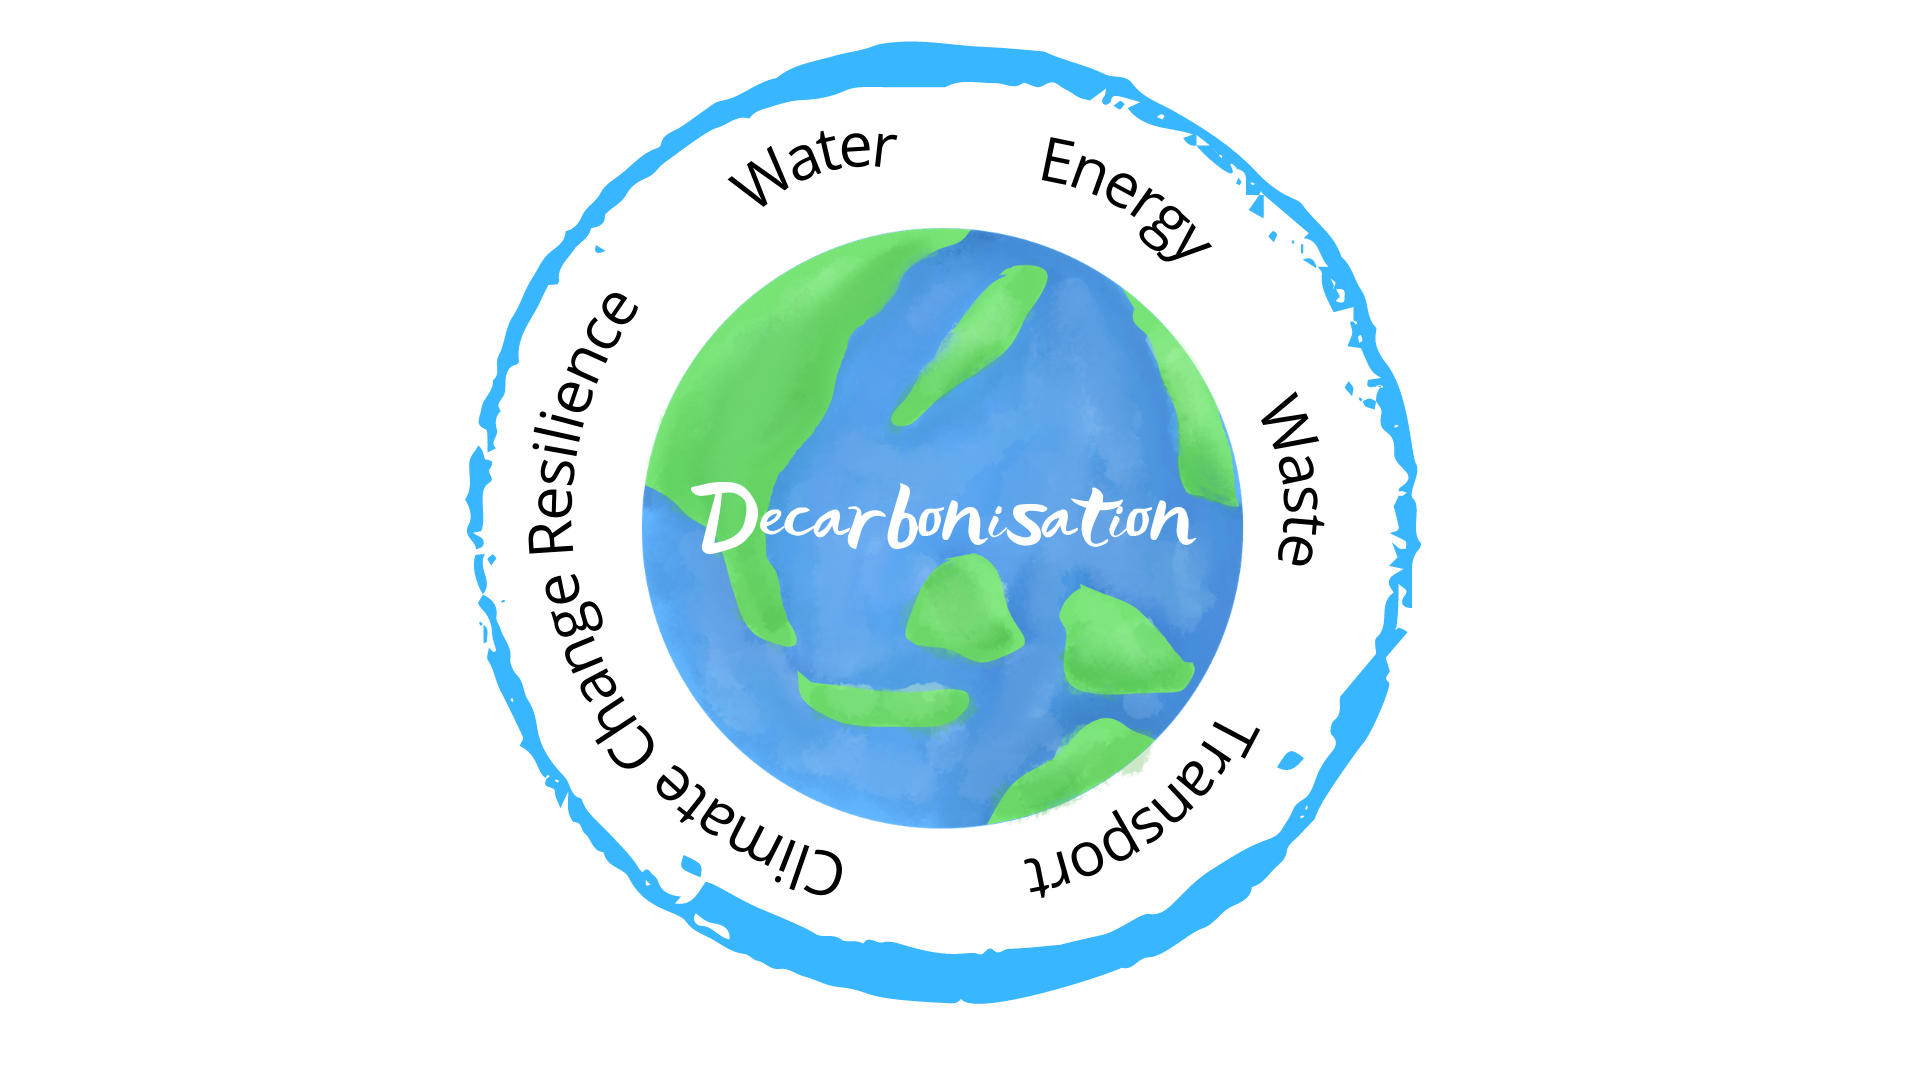 Decarbonisation with EarthCheck